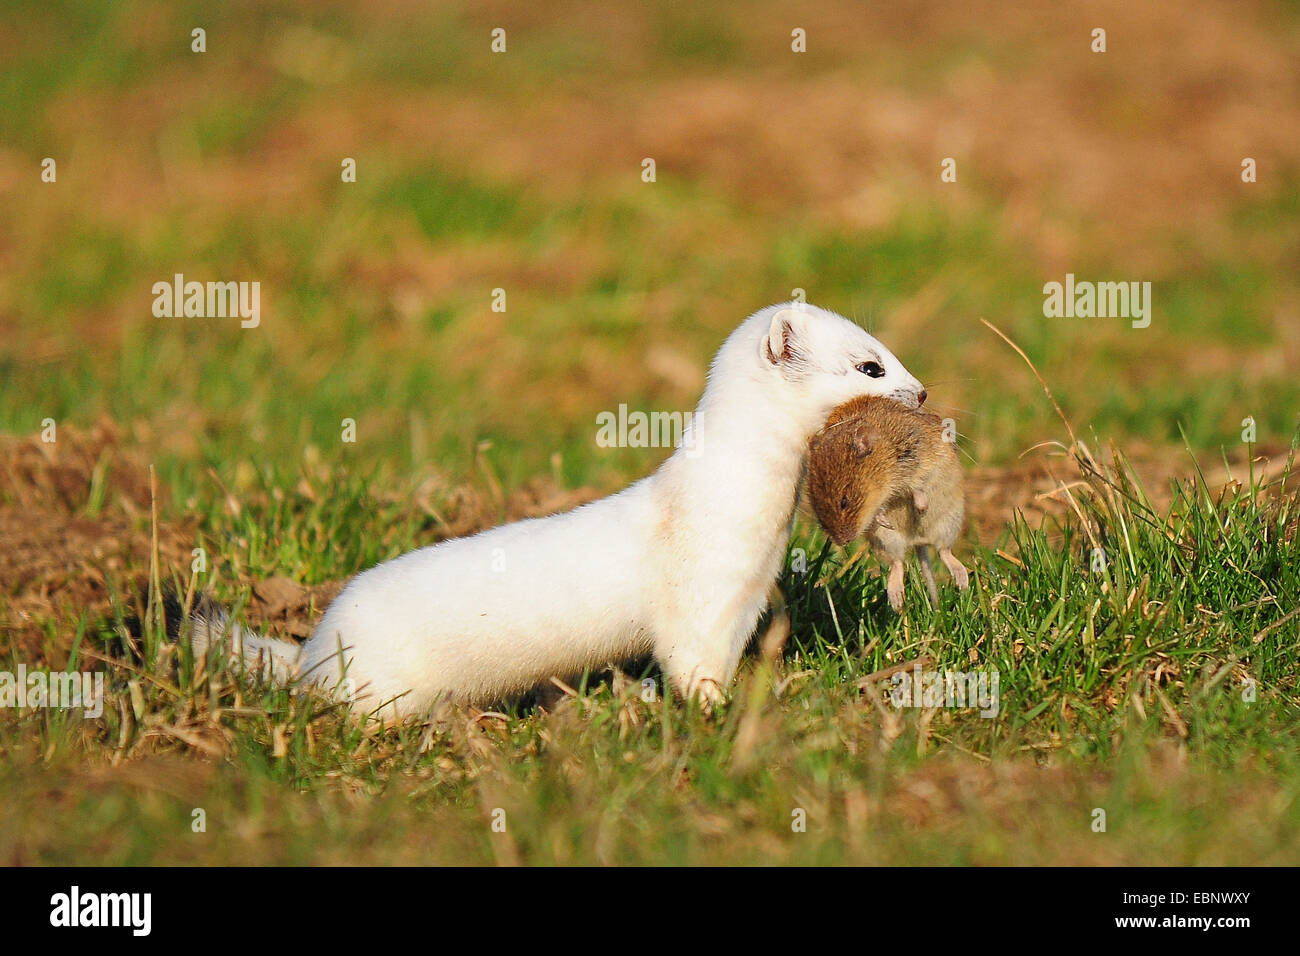 Ermine, Stoat, Short-tailed weasel (Mustela erminea), sitting in a meadow with prey in its mouth, Germany Stock Photo